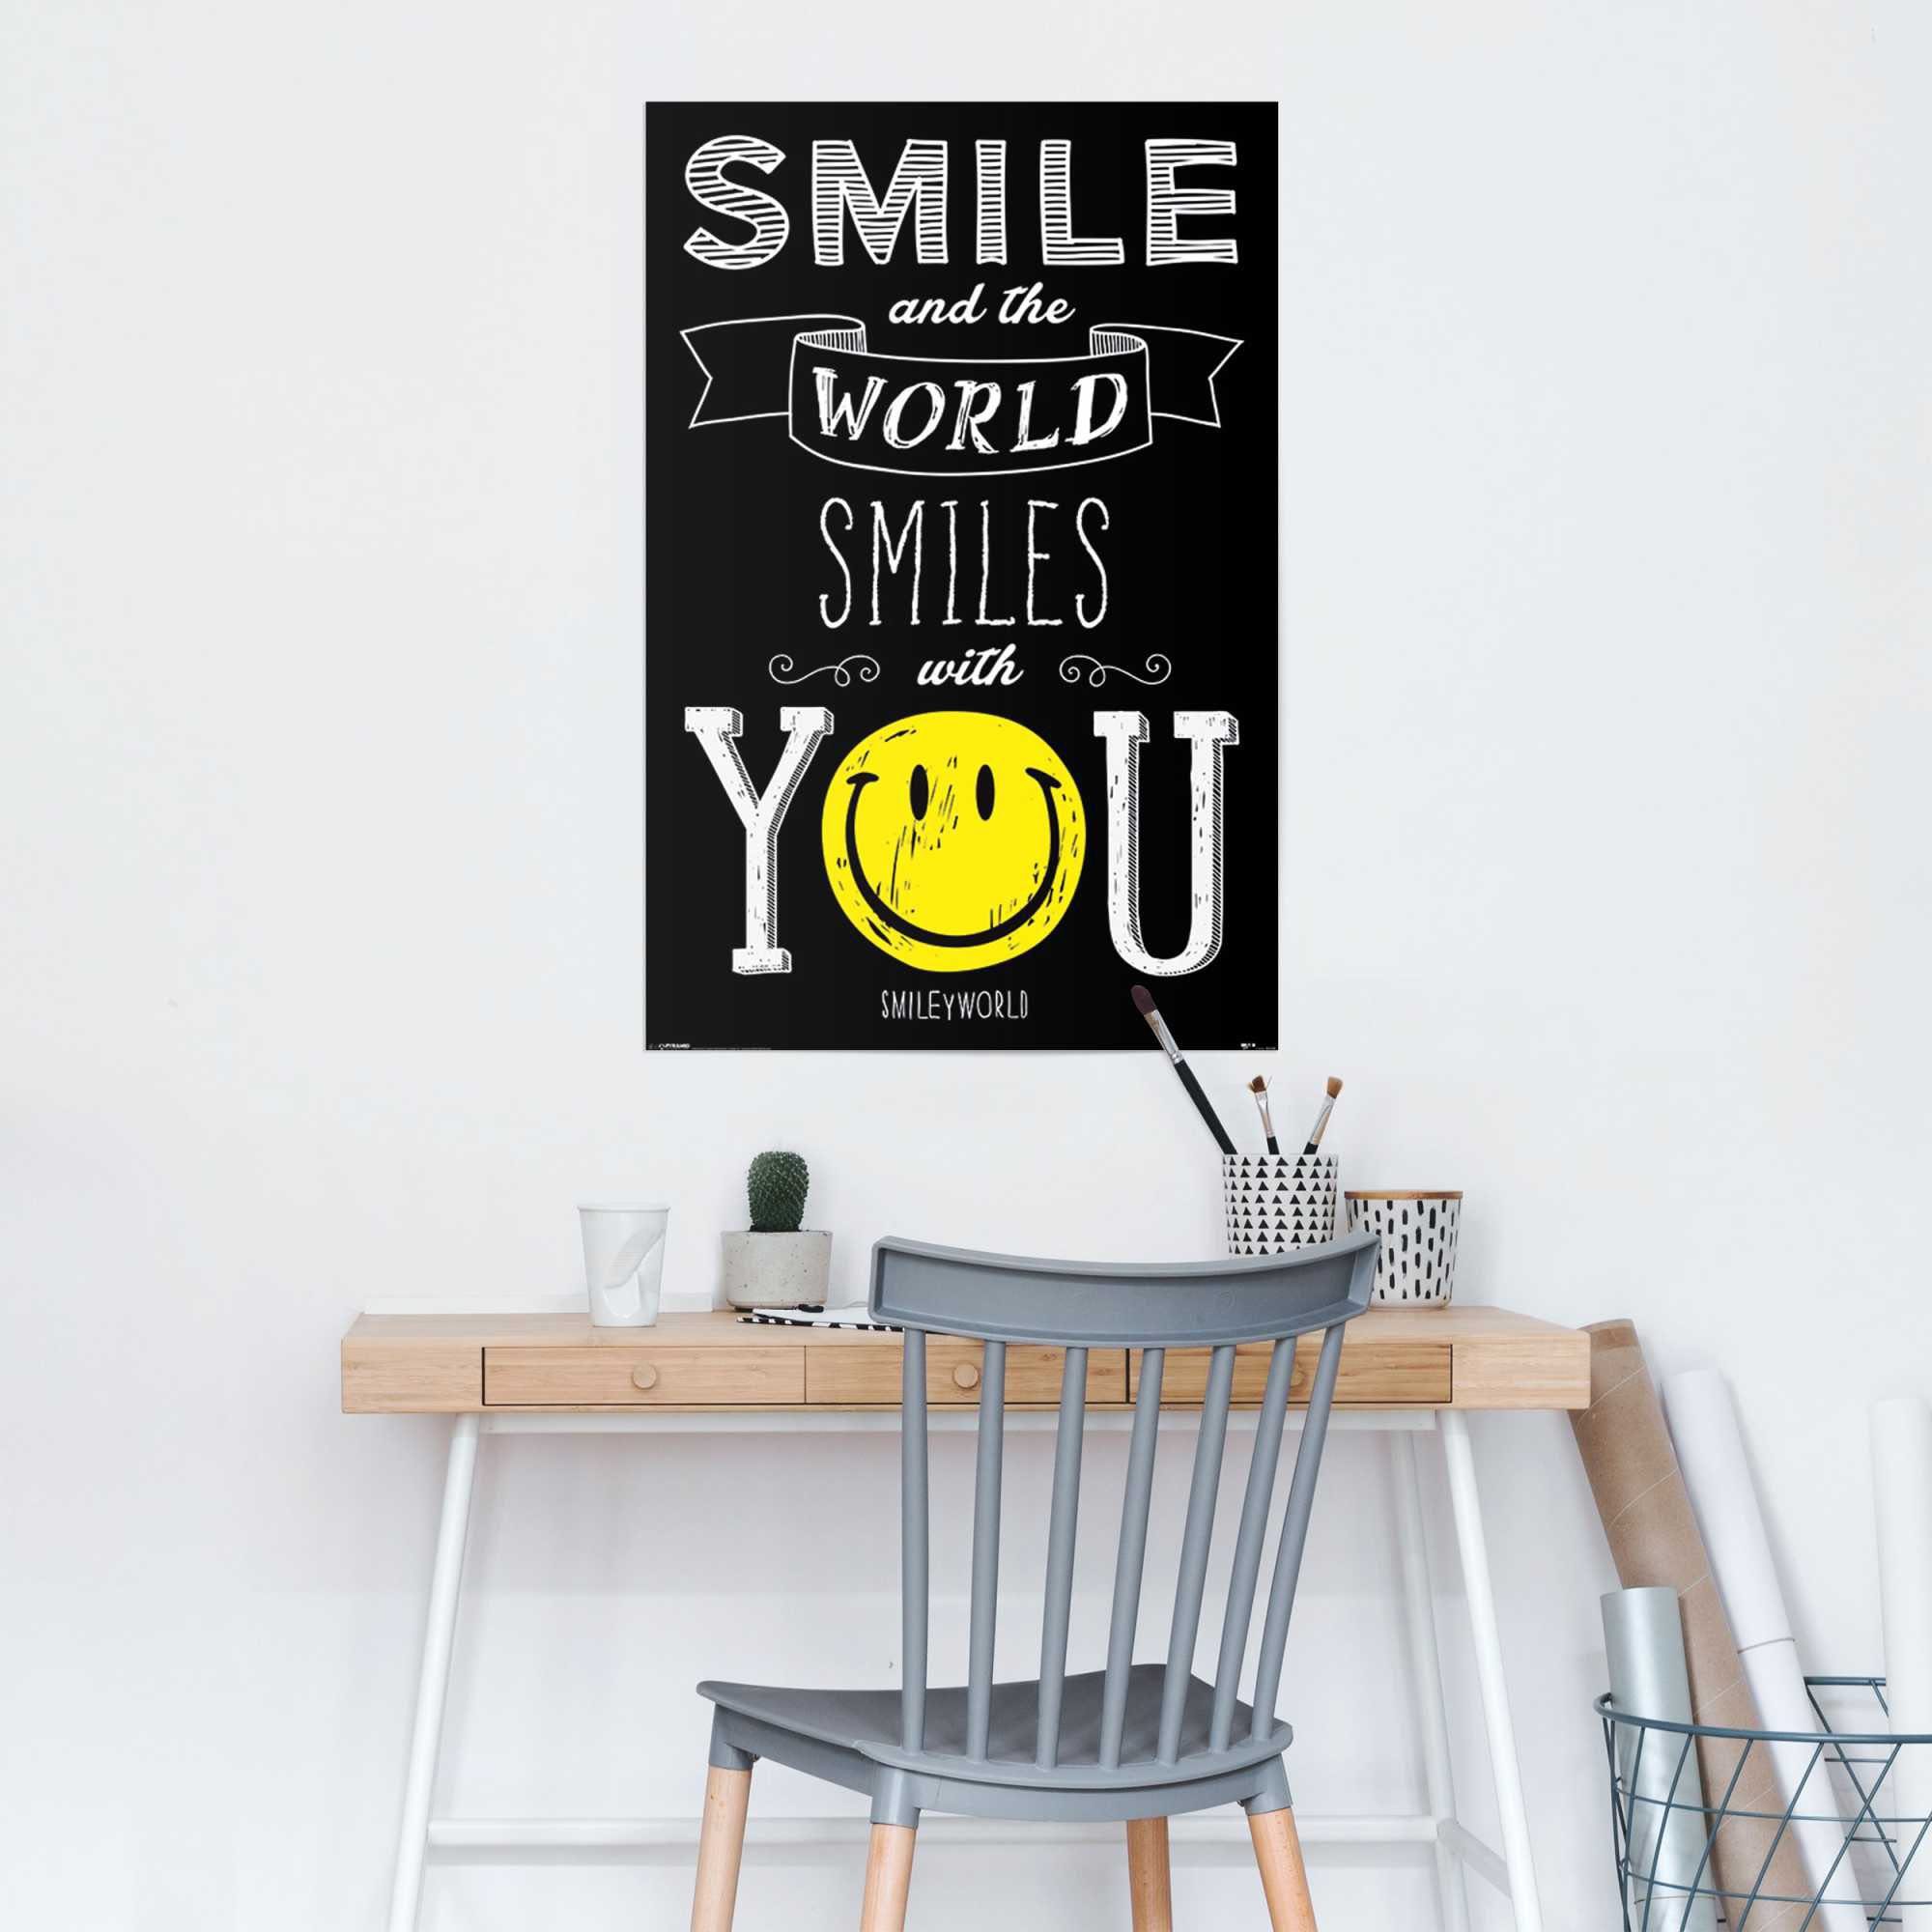 with you, Poster Smiley St) (1 world smiles Reinders!